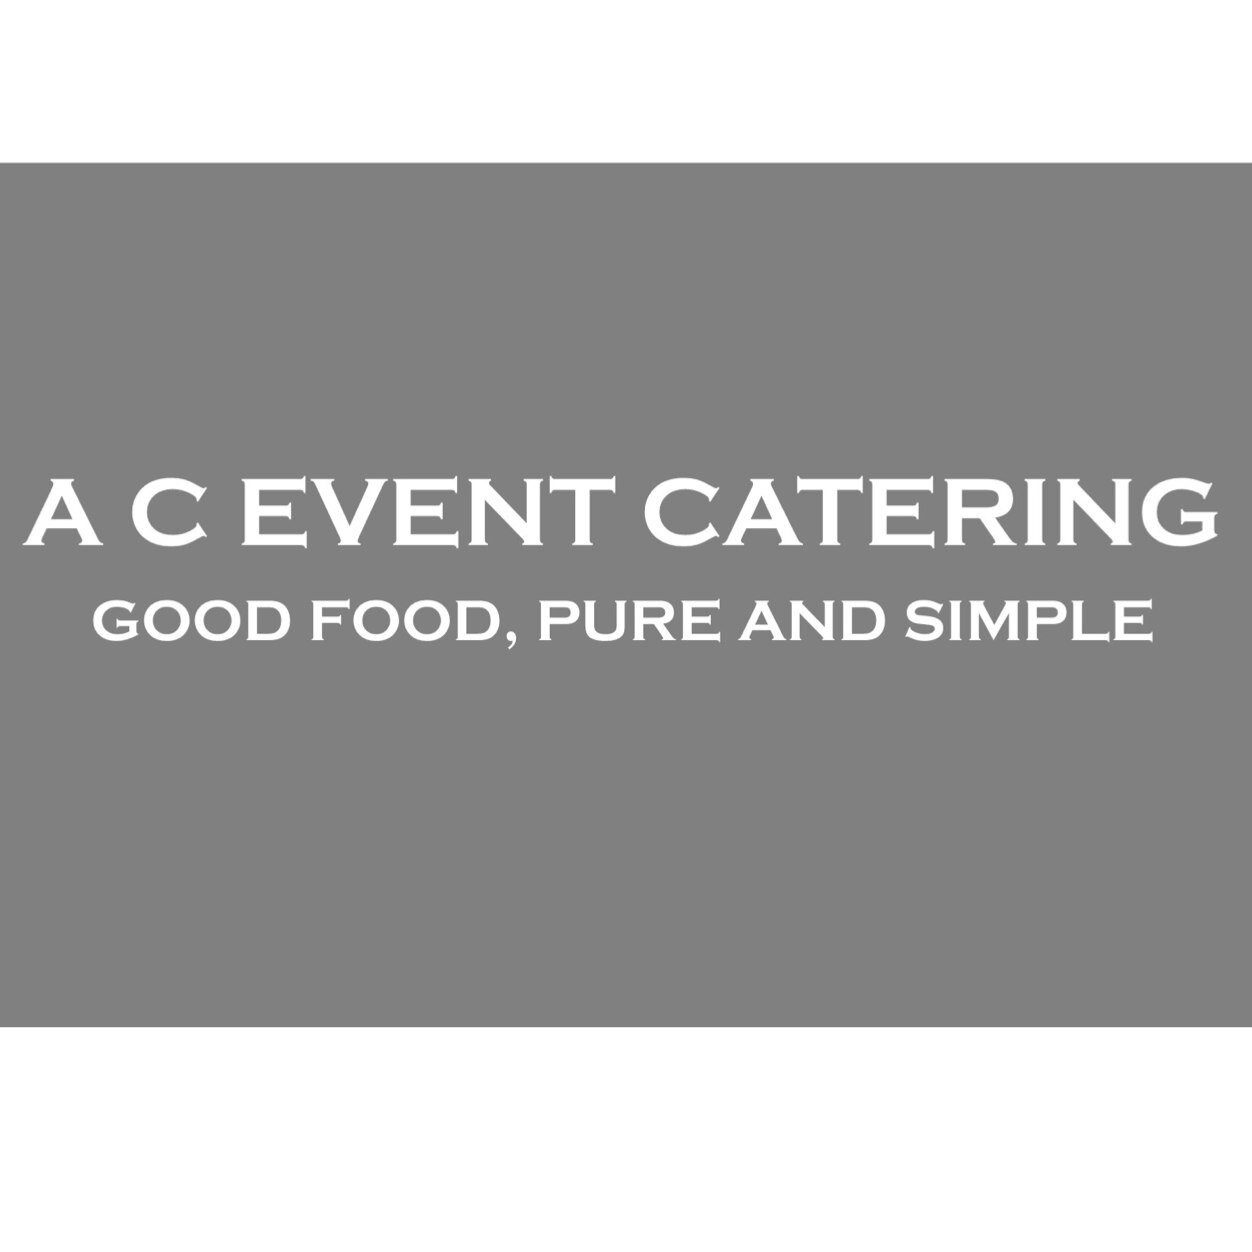 A C EVENT CATERING